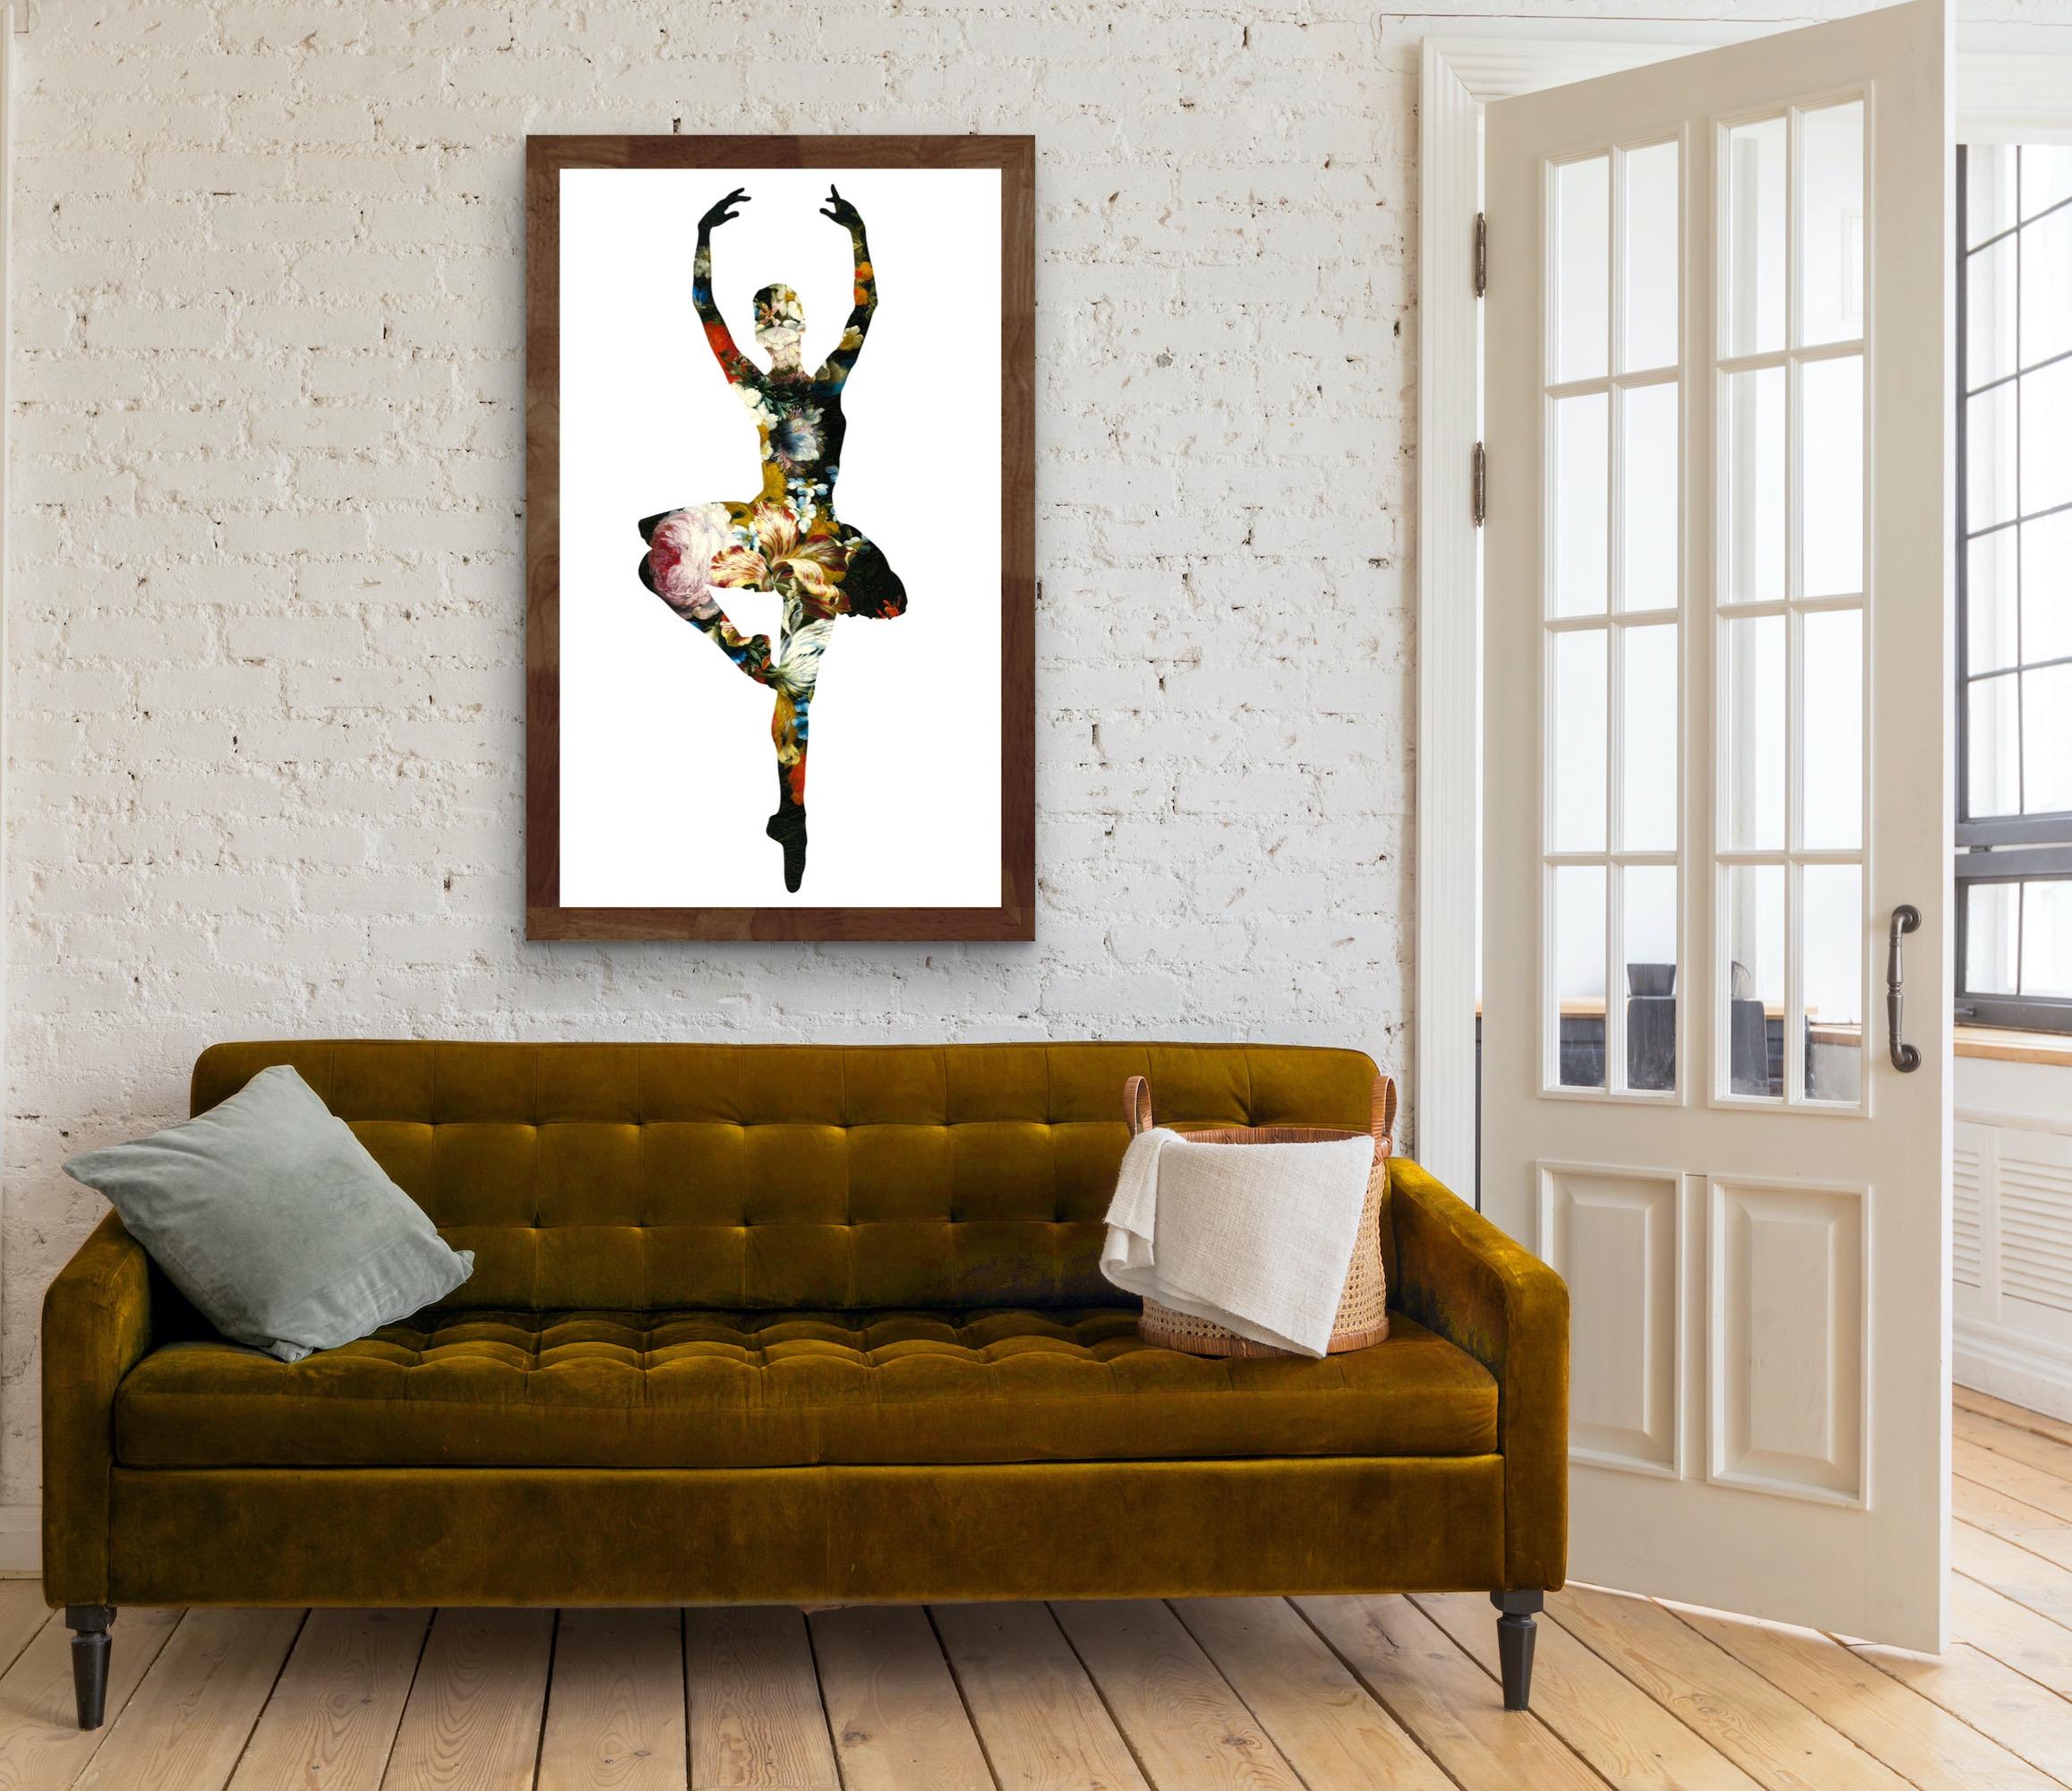 ‘En Dedans Pirouette Avec Les Fleurs (white)’ depicts the silhouette of a ballet dancer, caught mid-pirouette. As if snipped from the pure white background, Agent X creates the illusion of a cut-out, to reveal a Baroque, floral painting underneath